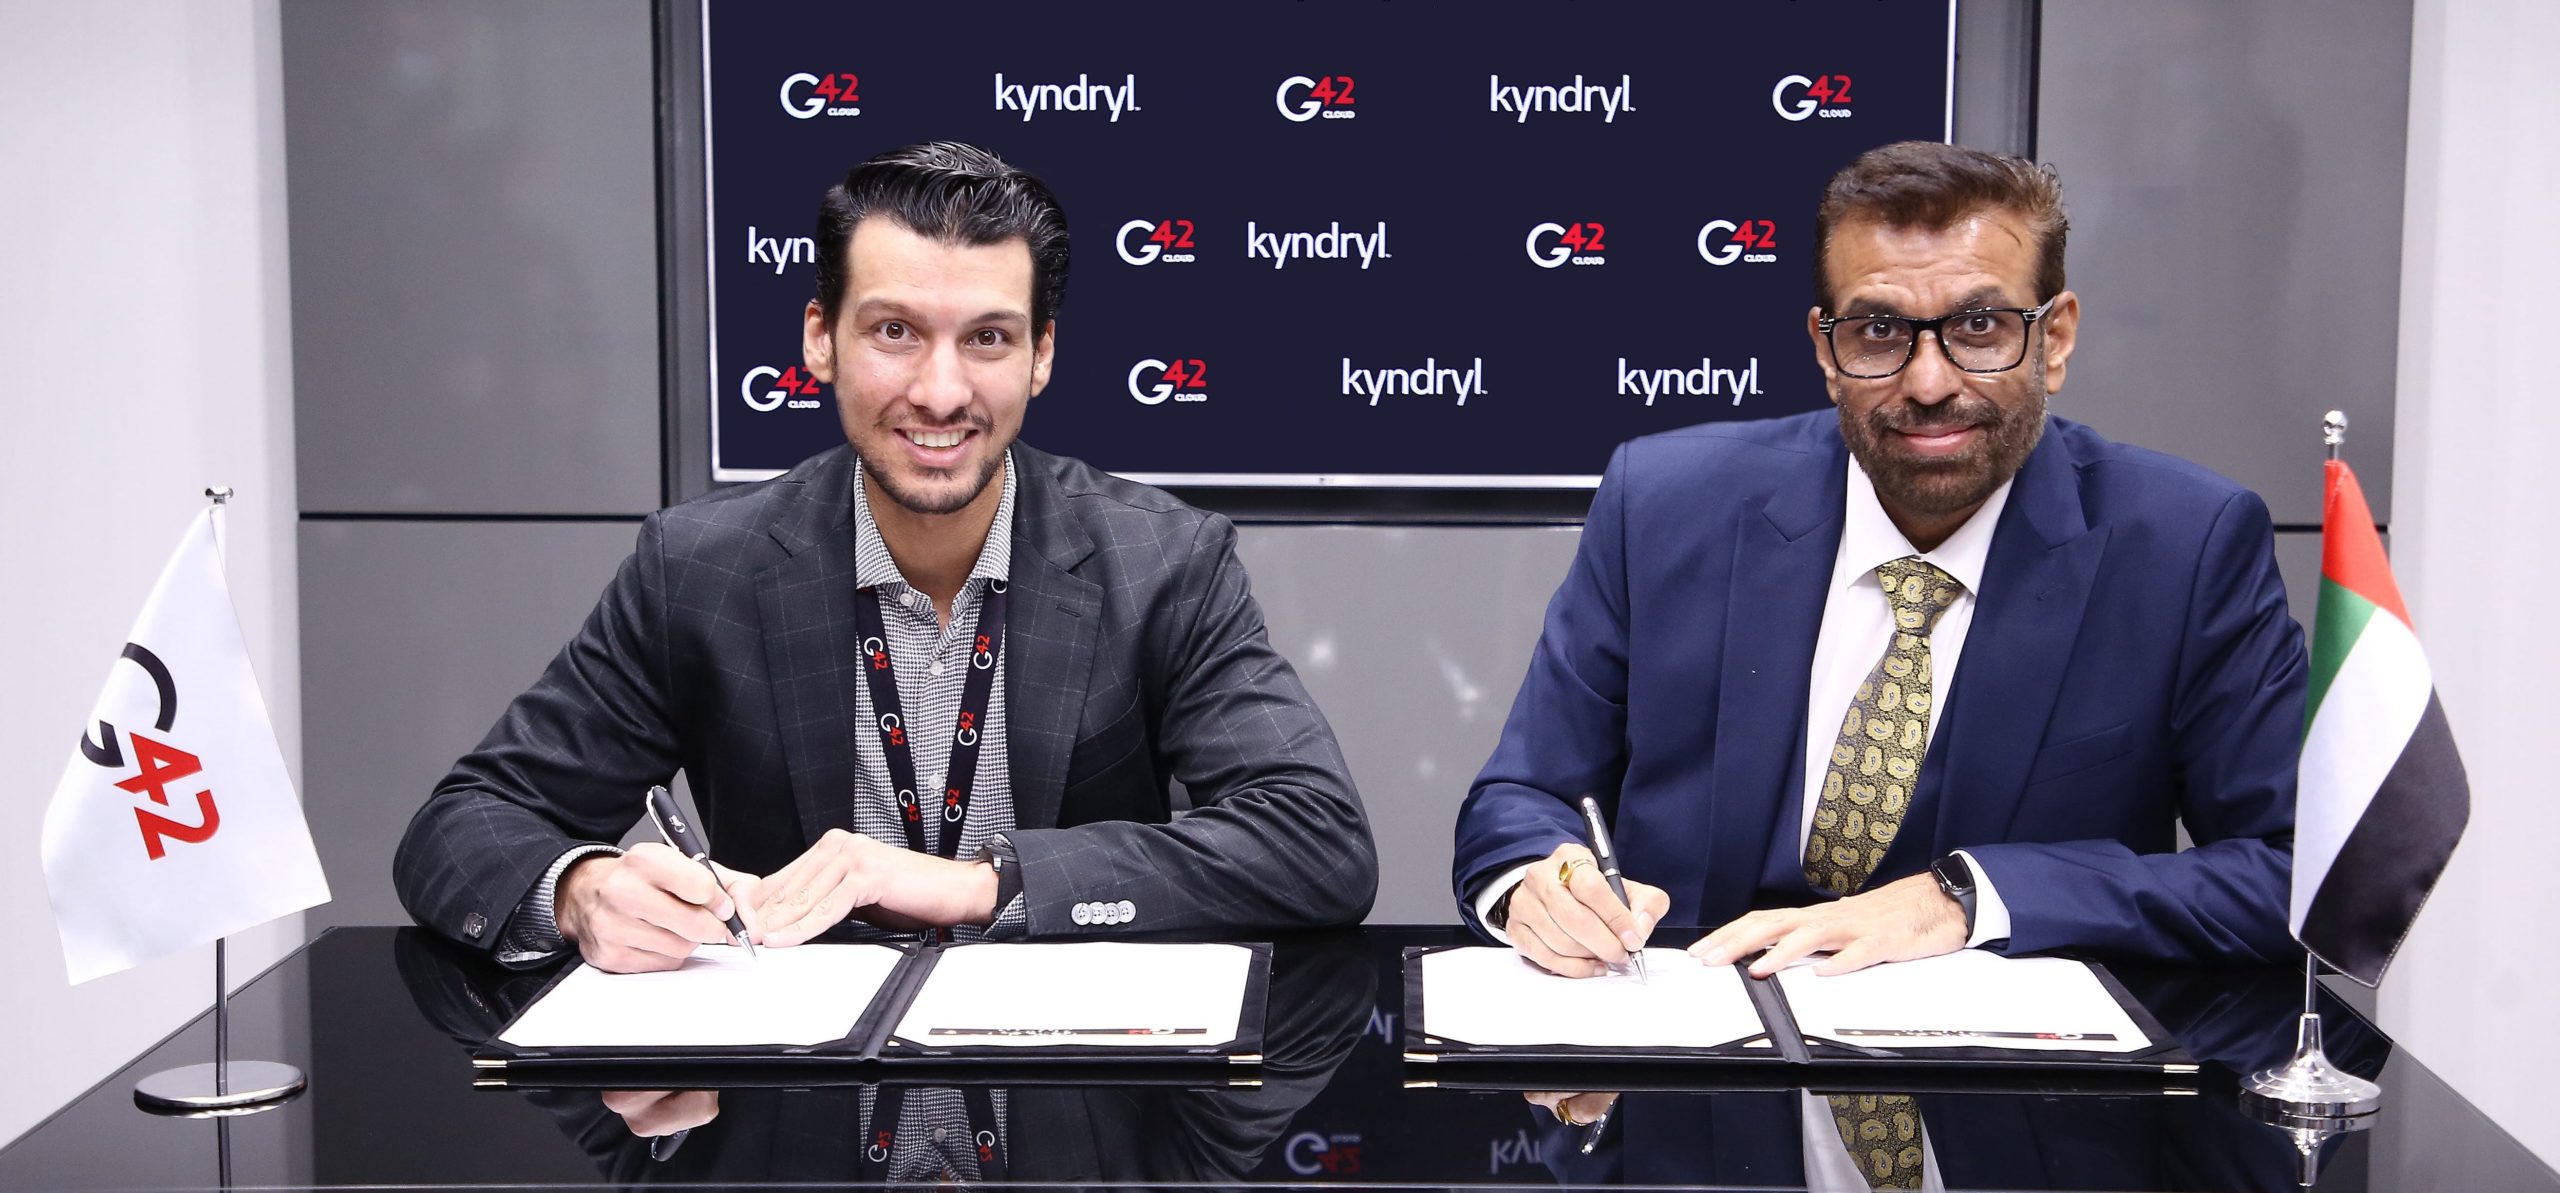 G42 Cloud and Kyndryl collaborate to accelerate cloud adoption and business transformation